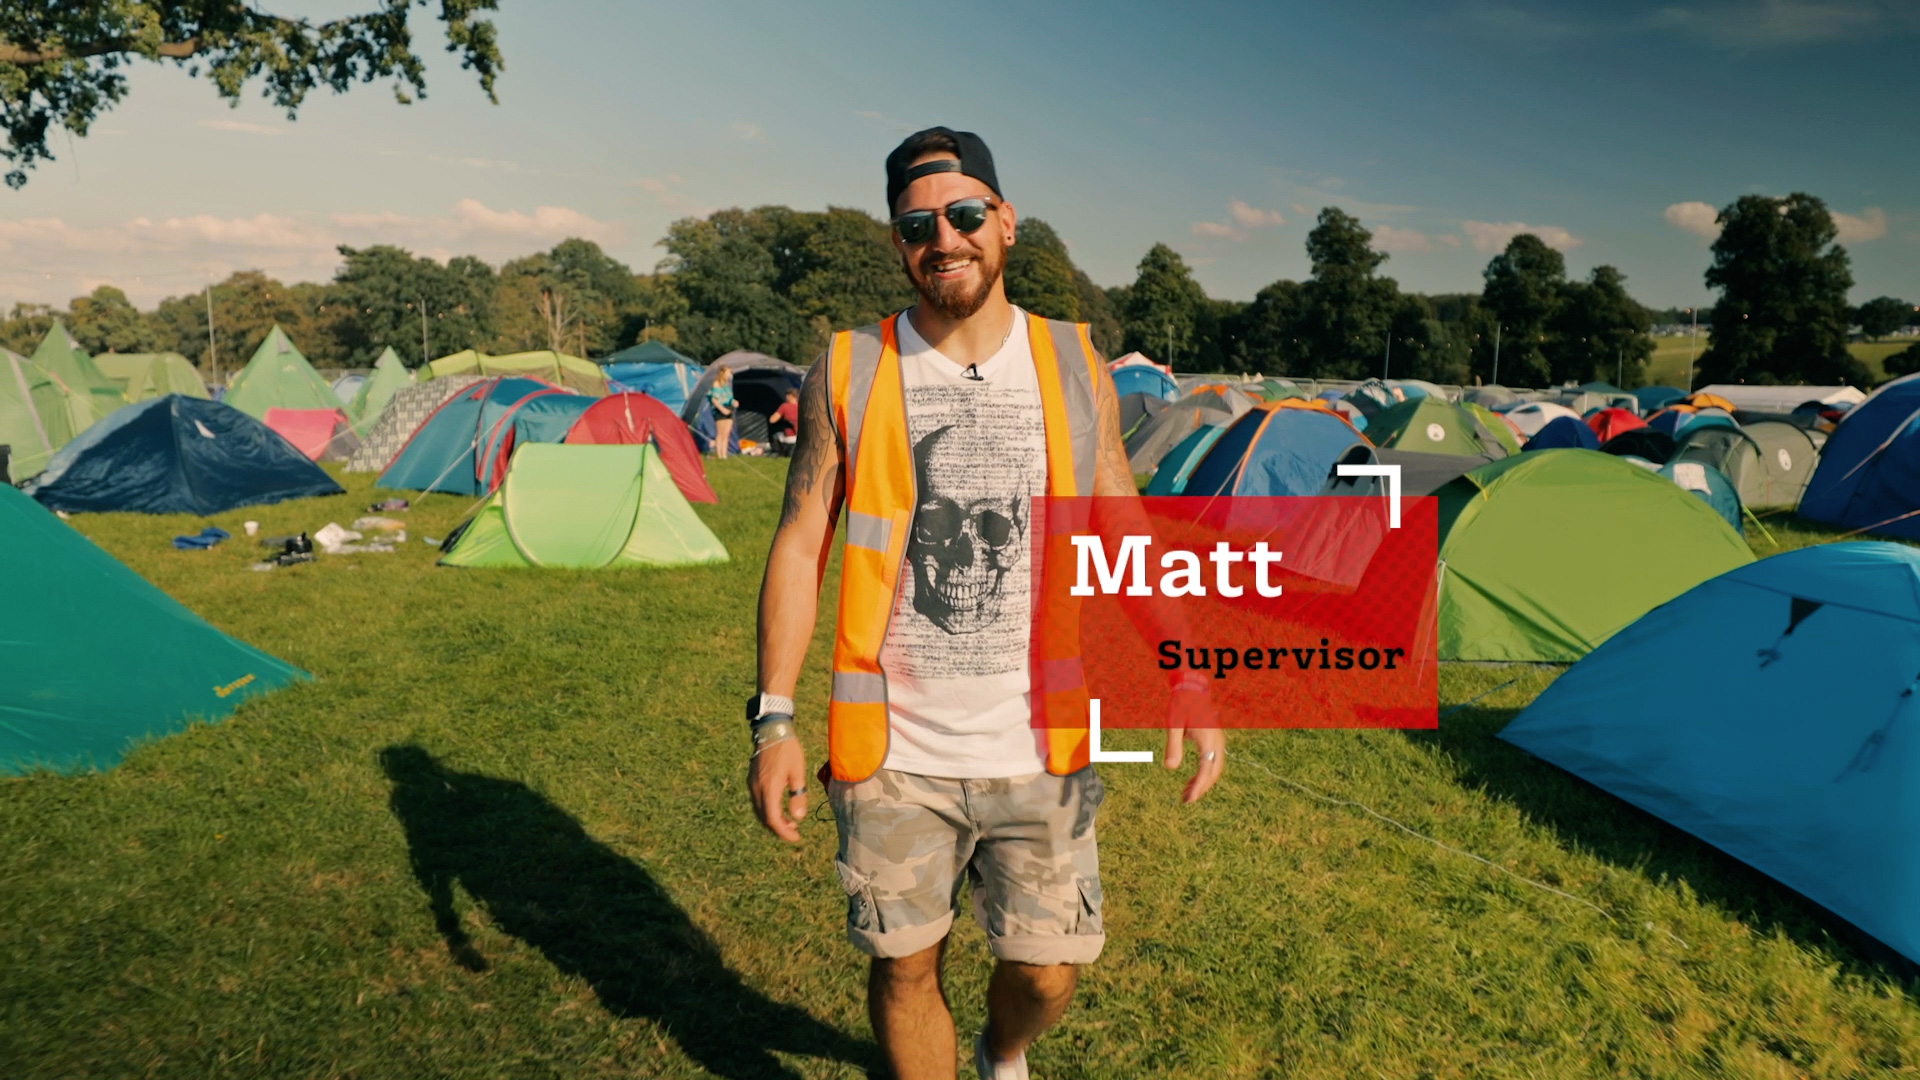 Matt a Campsite Supervisor working with Hotbox Events at Leeds Festival!